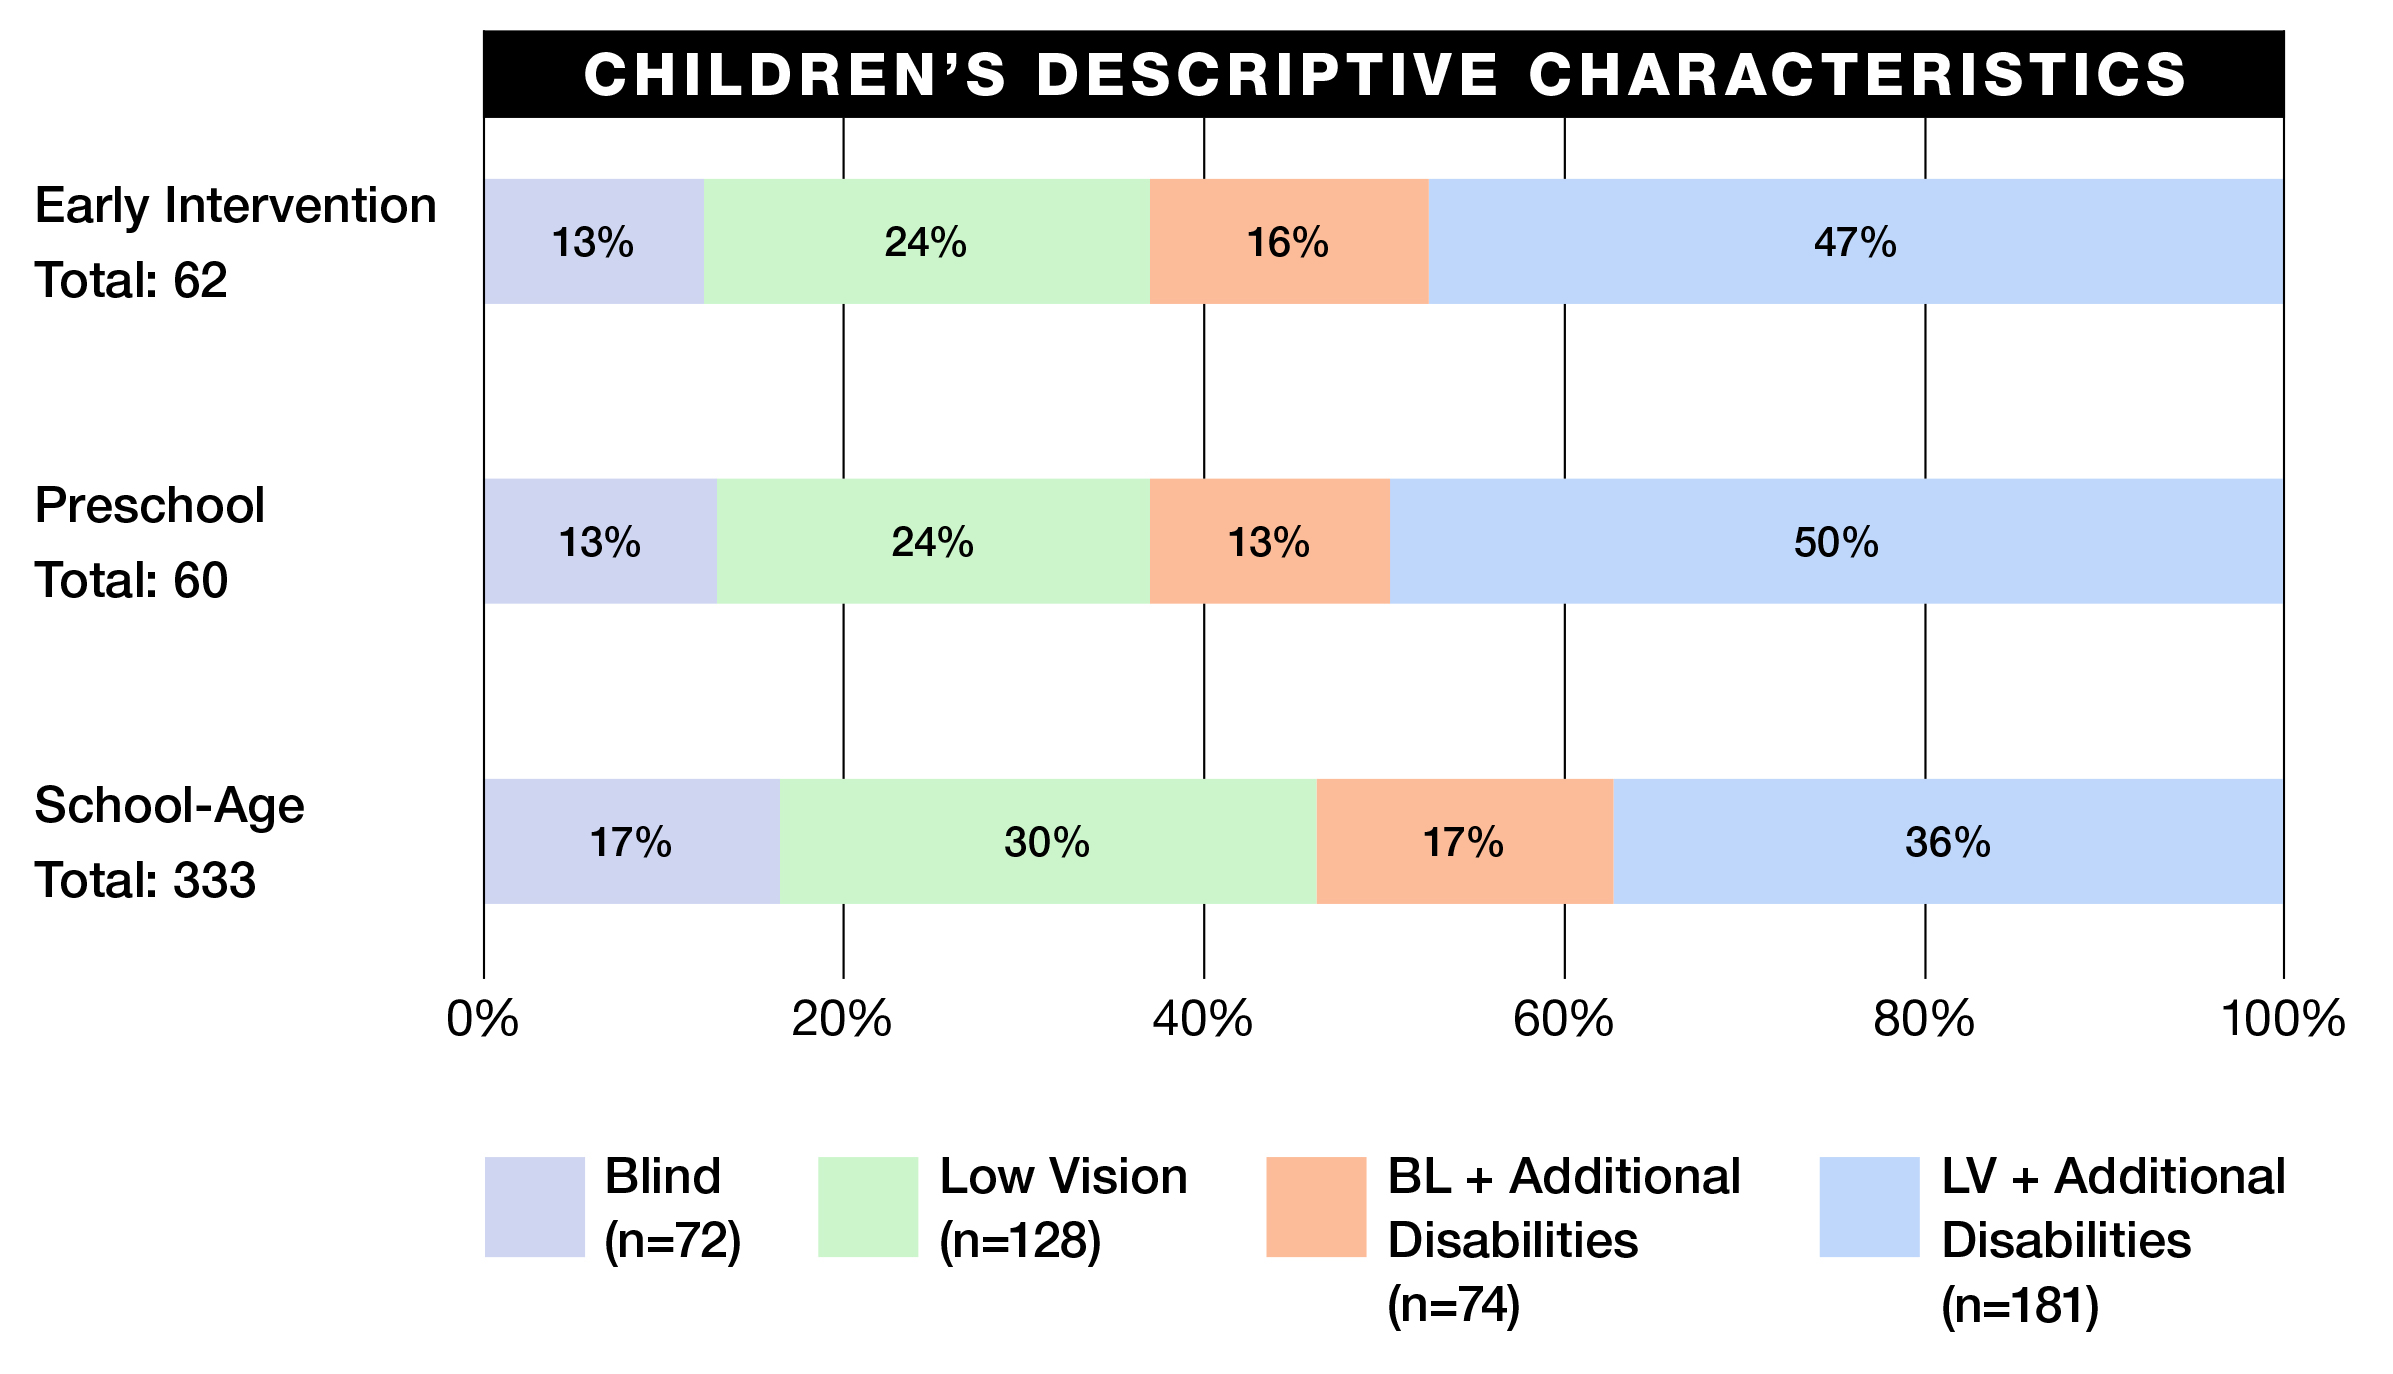 A bar graph displaying the data outlined above - within the early intervention group, 13% were blind, 24% were low vision, 16% were blind with additional disabilities, and 47% were low vision with additional disabilities. Within the preschool group, 13% were blind, 24% were low vision, 13% were blind with additional disabilities, and 50% were low vision with additional disabilities. And within the school-age group, 17% were blind, 30% were low vision, 17% were blind with additional disabilities, and 36% were low vision with additional disabilities.” width=“460